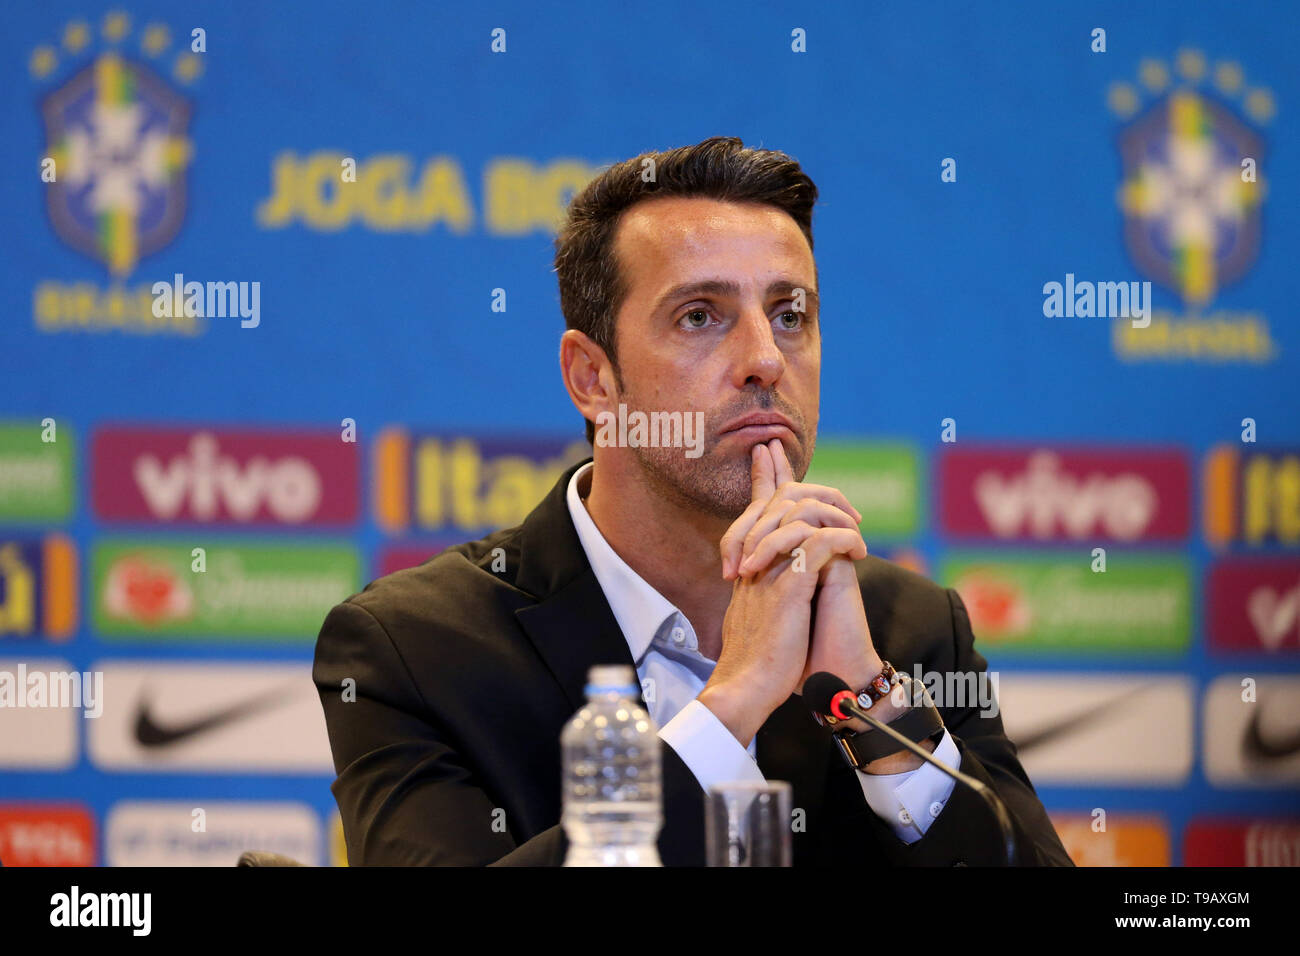 Rio De Janeiro, Brazil. 17th May, 2019. Edu Gaspar, general coordinator of the Brazilian national football team, reacts during a press conference to announce the list of the 23 players for the Copa America 2019 at the headquarter of CBF (Brazilian Football Confederation) in Rio de Janeiro, RJ, Brazil, on May 17, 2019. The tournament will be held from June 14 to July 7 in five cities in Brazil. Credit: Li Ming/Xinhua/Alamy Live News Stock Photo